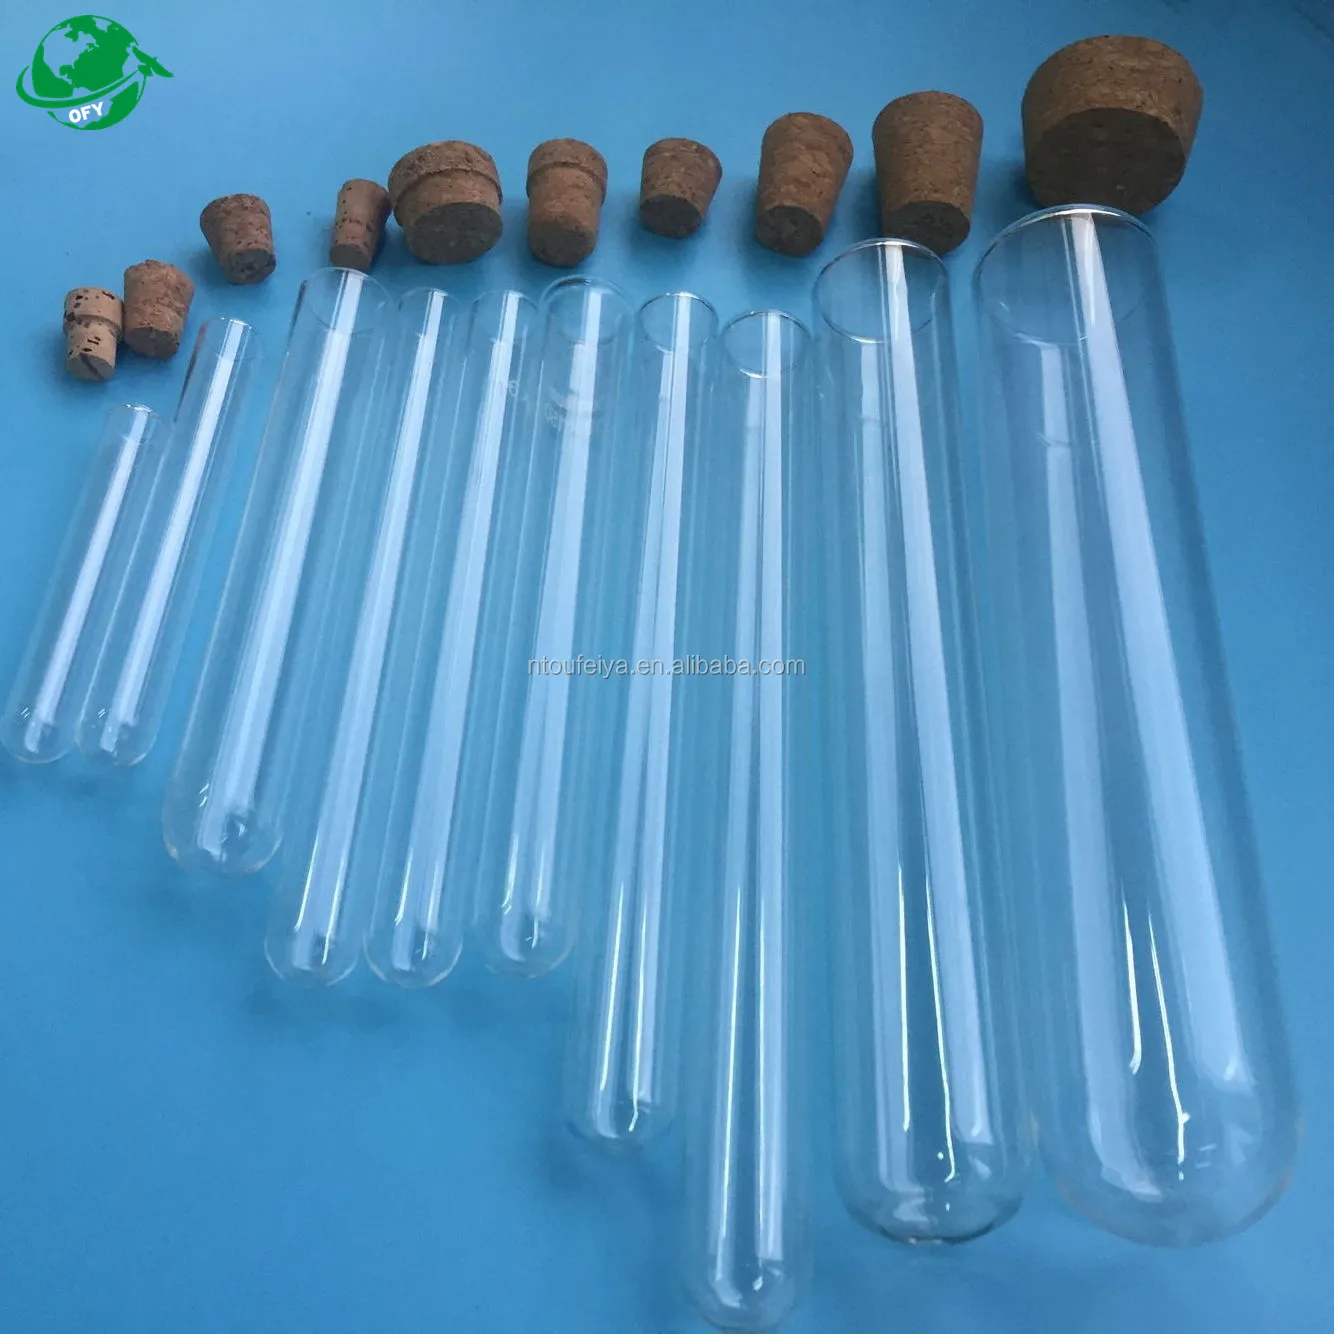 Amber Borosilicate Glass Test Tubes With Cork For Product Packaging Buy Glass Test Tubes Amber